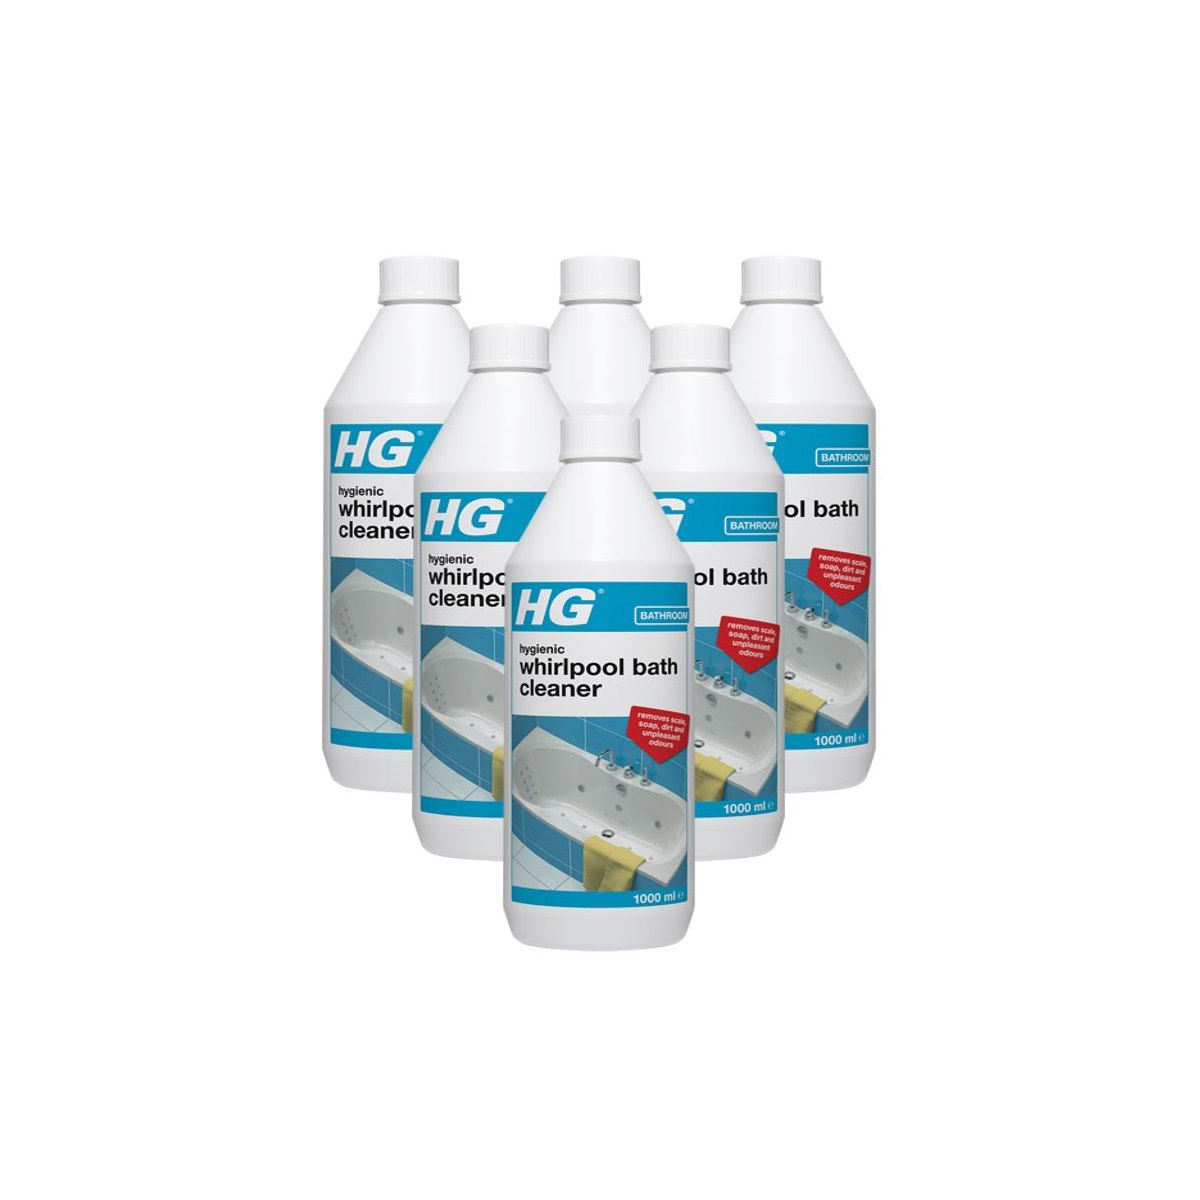 Case of 6 x HG Hygienic Whirlpool Bath Cleaner 1 Litre